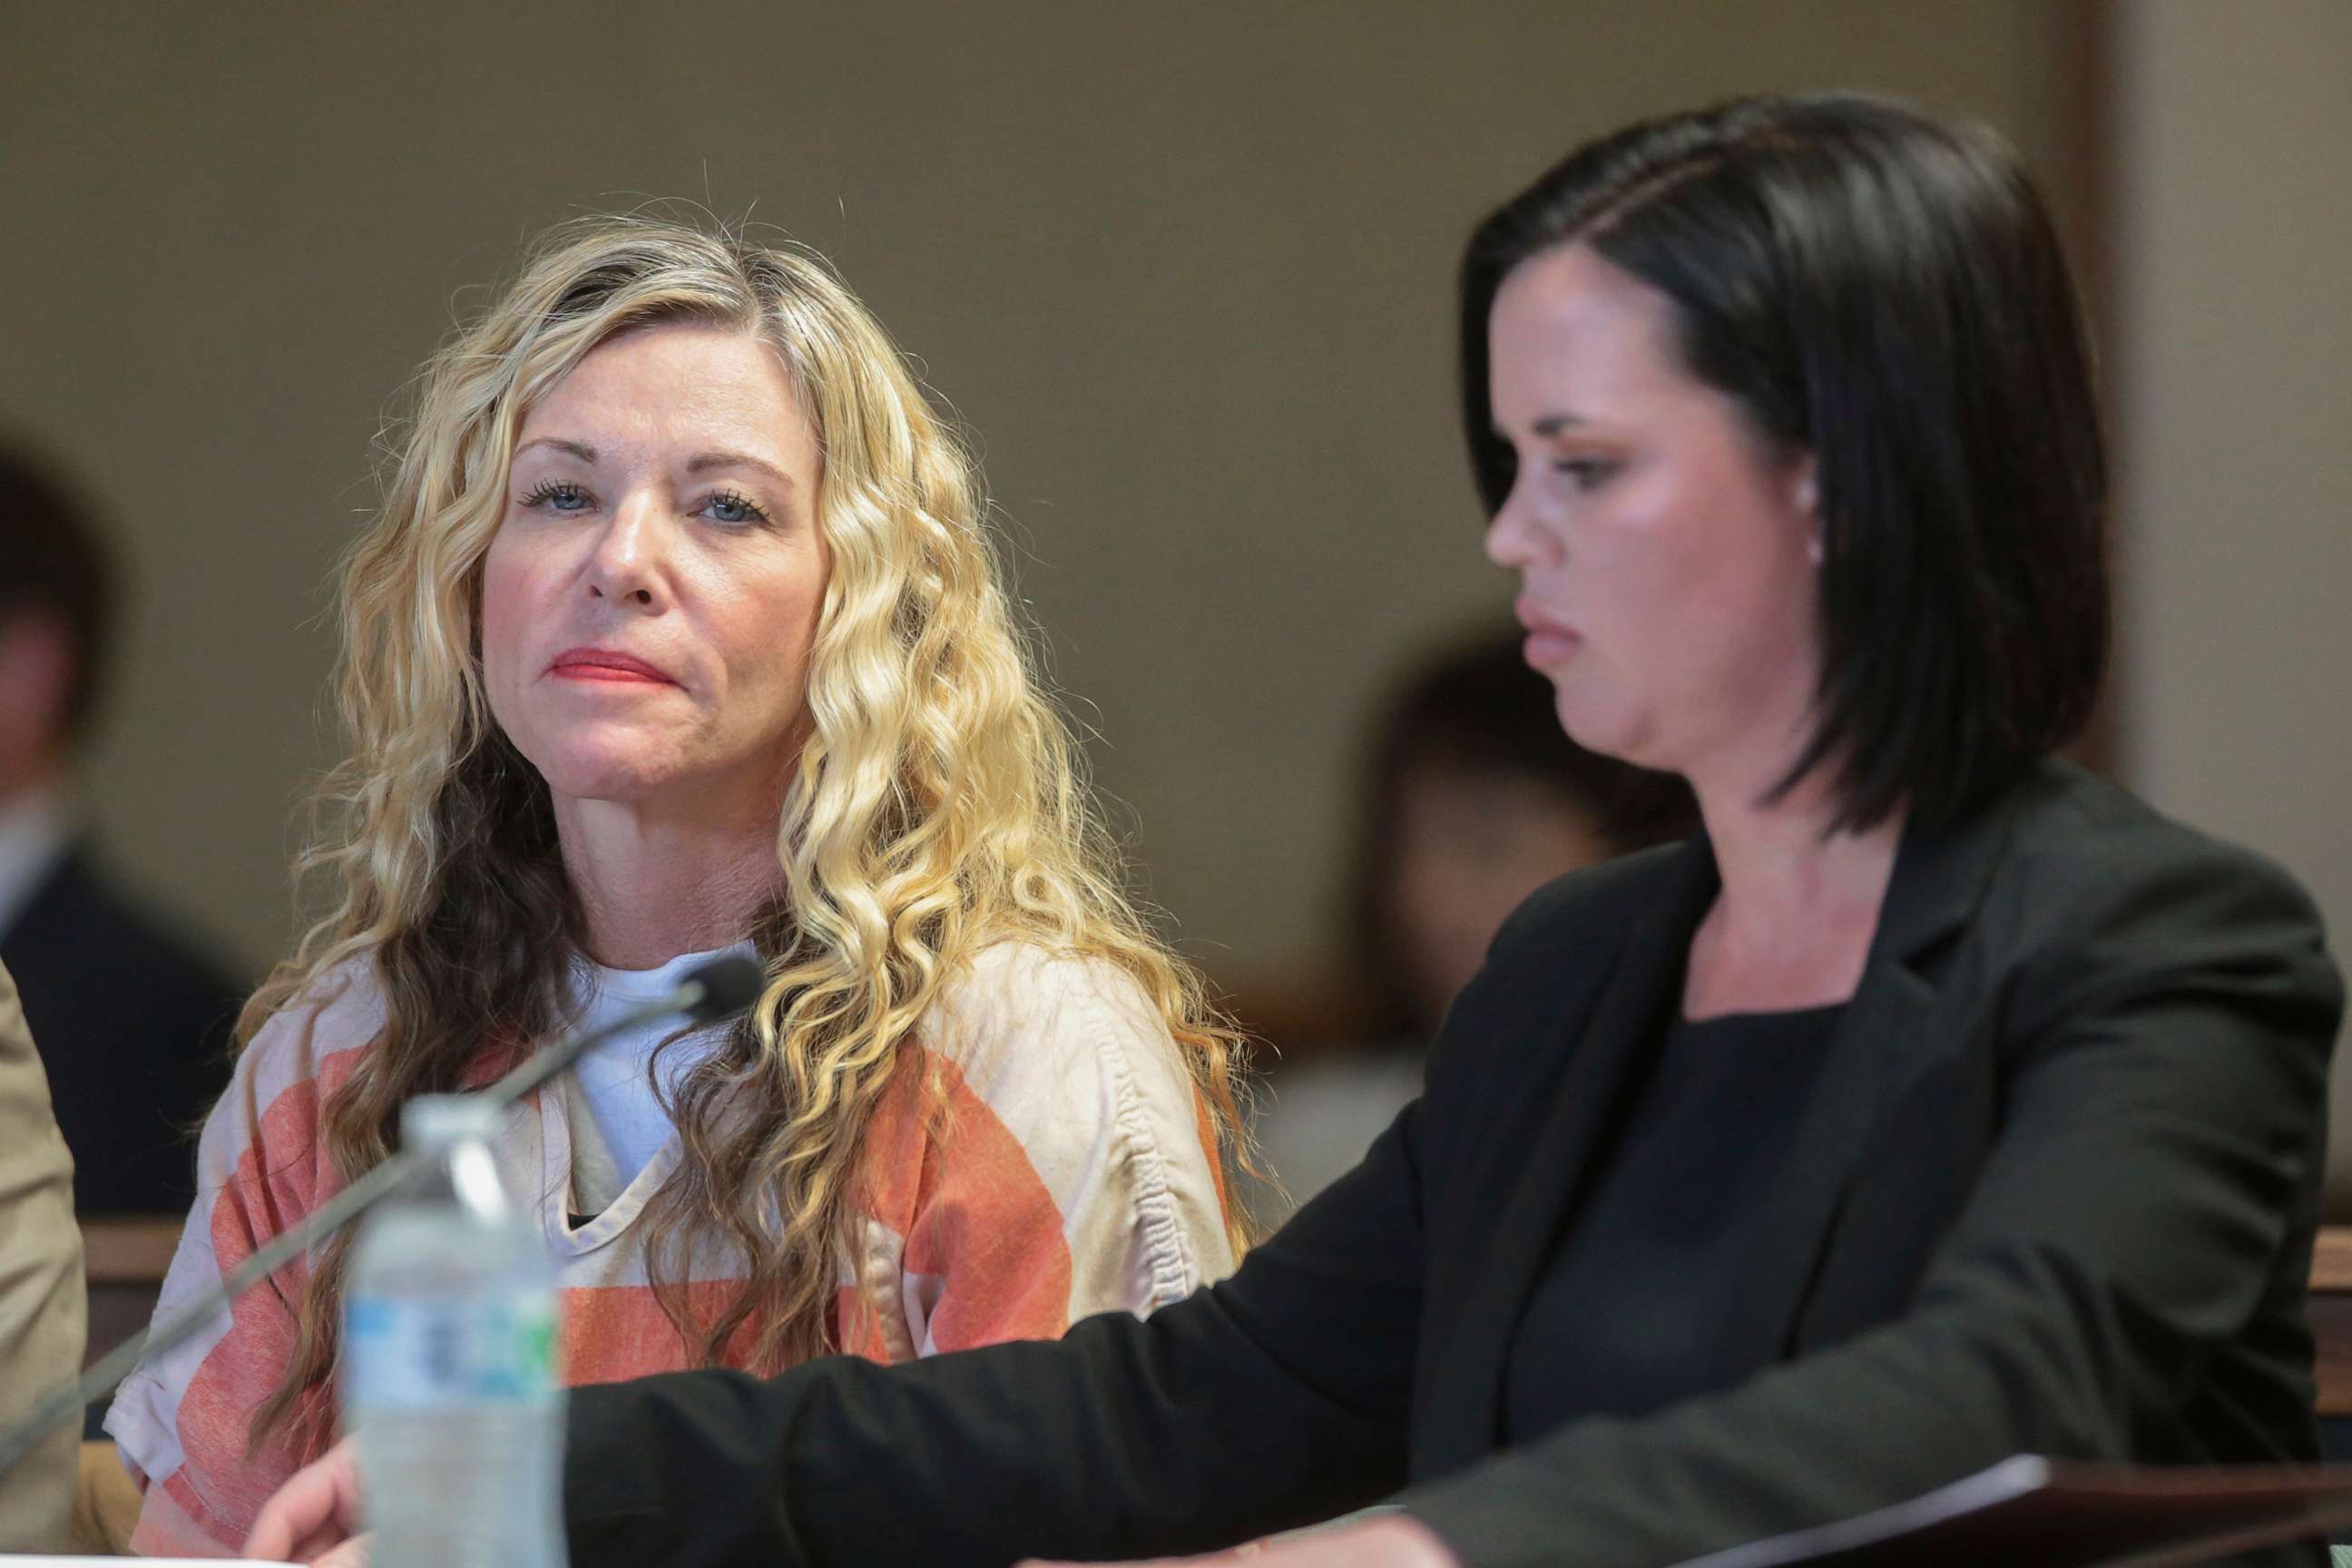 PHOTO: In this March 8, 2020, file photo, Lori Vallow Daybell glances at the camera during her hearing in Rexburg, Idaho.